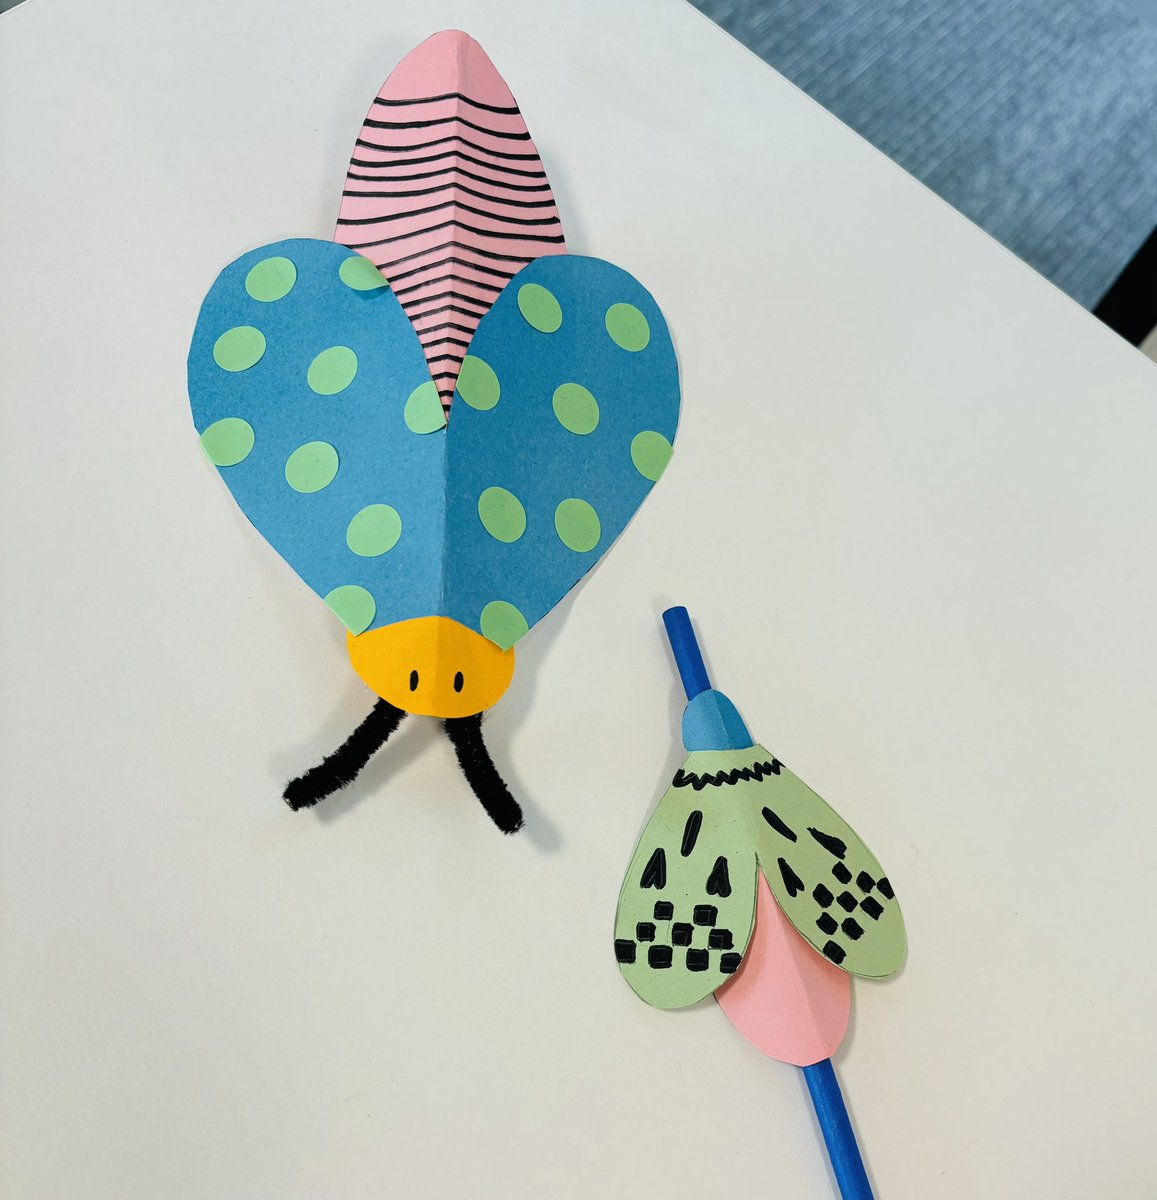 Bug out at Saturday’s craft session and make these cute colourful critters 🐞🪲! Join us @NorthcoteLibra1 Children’s Library this Saturday 4 May from 12pm-1pm.